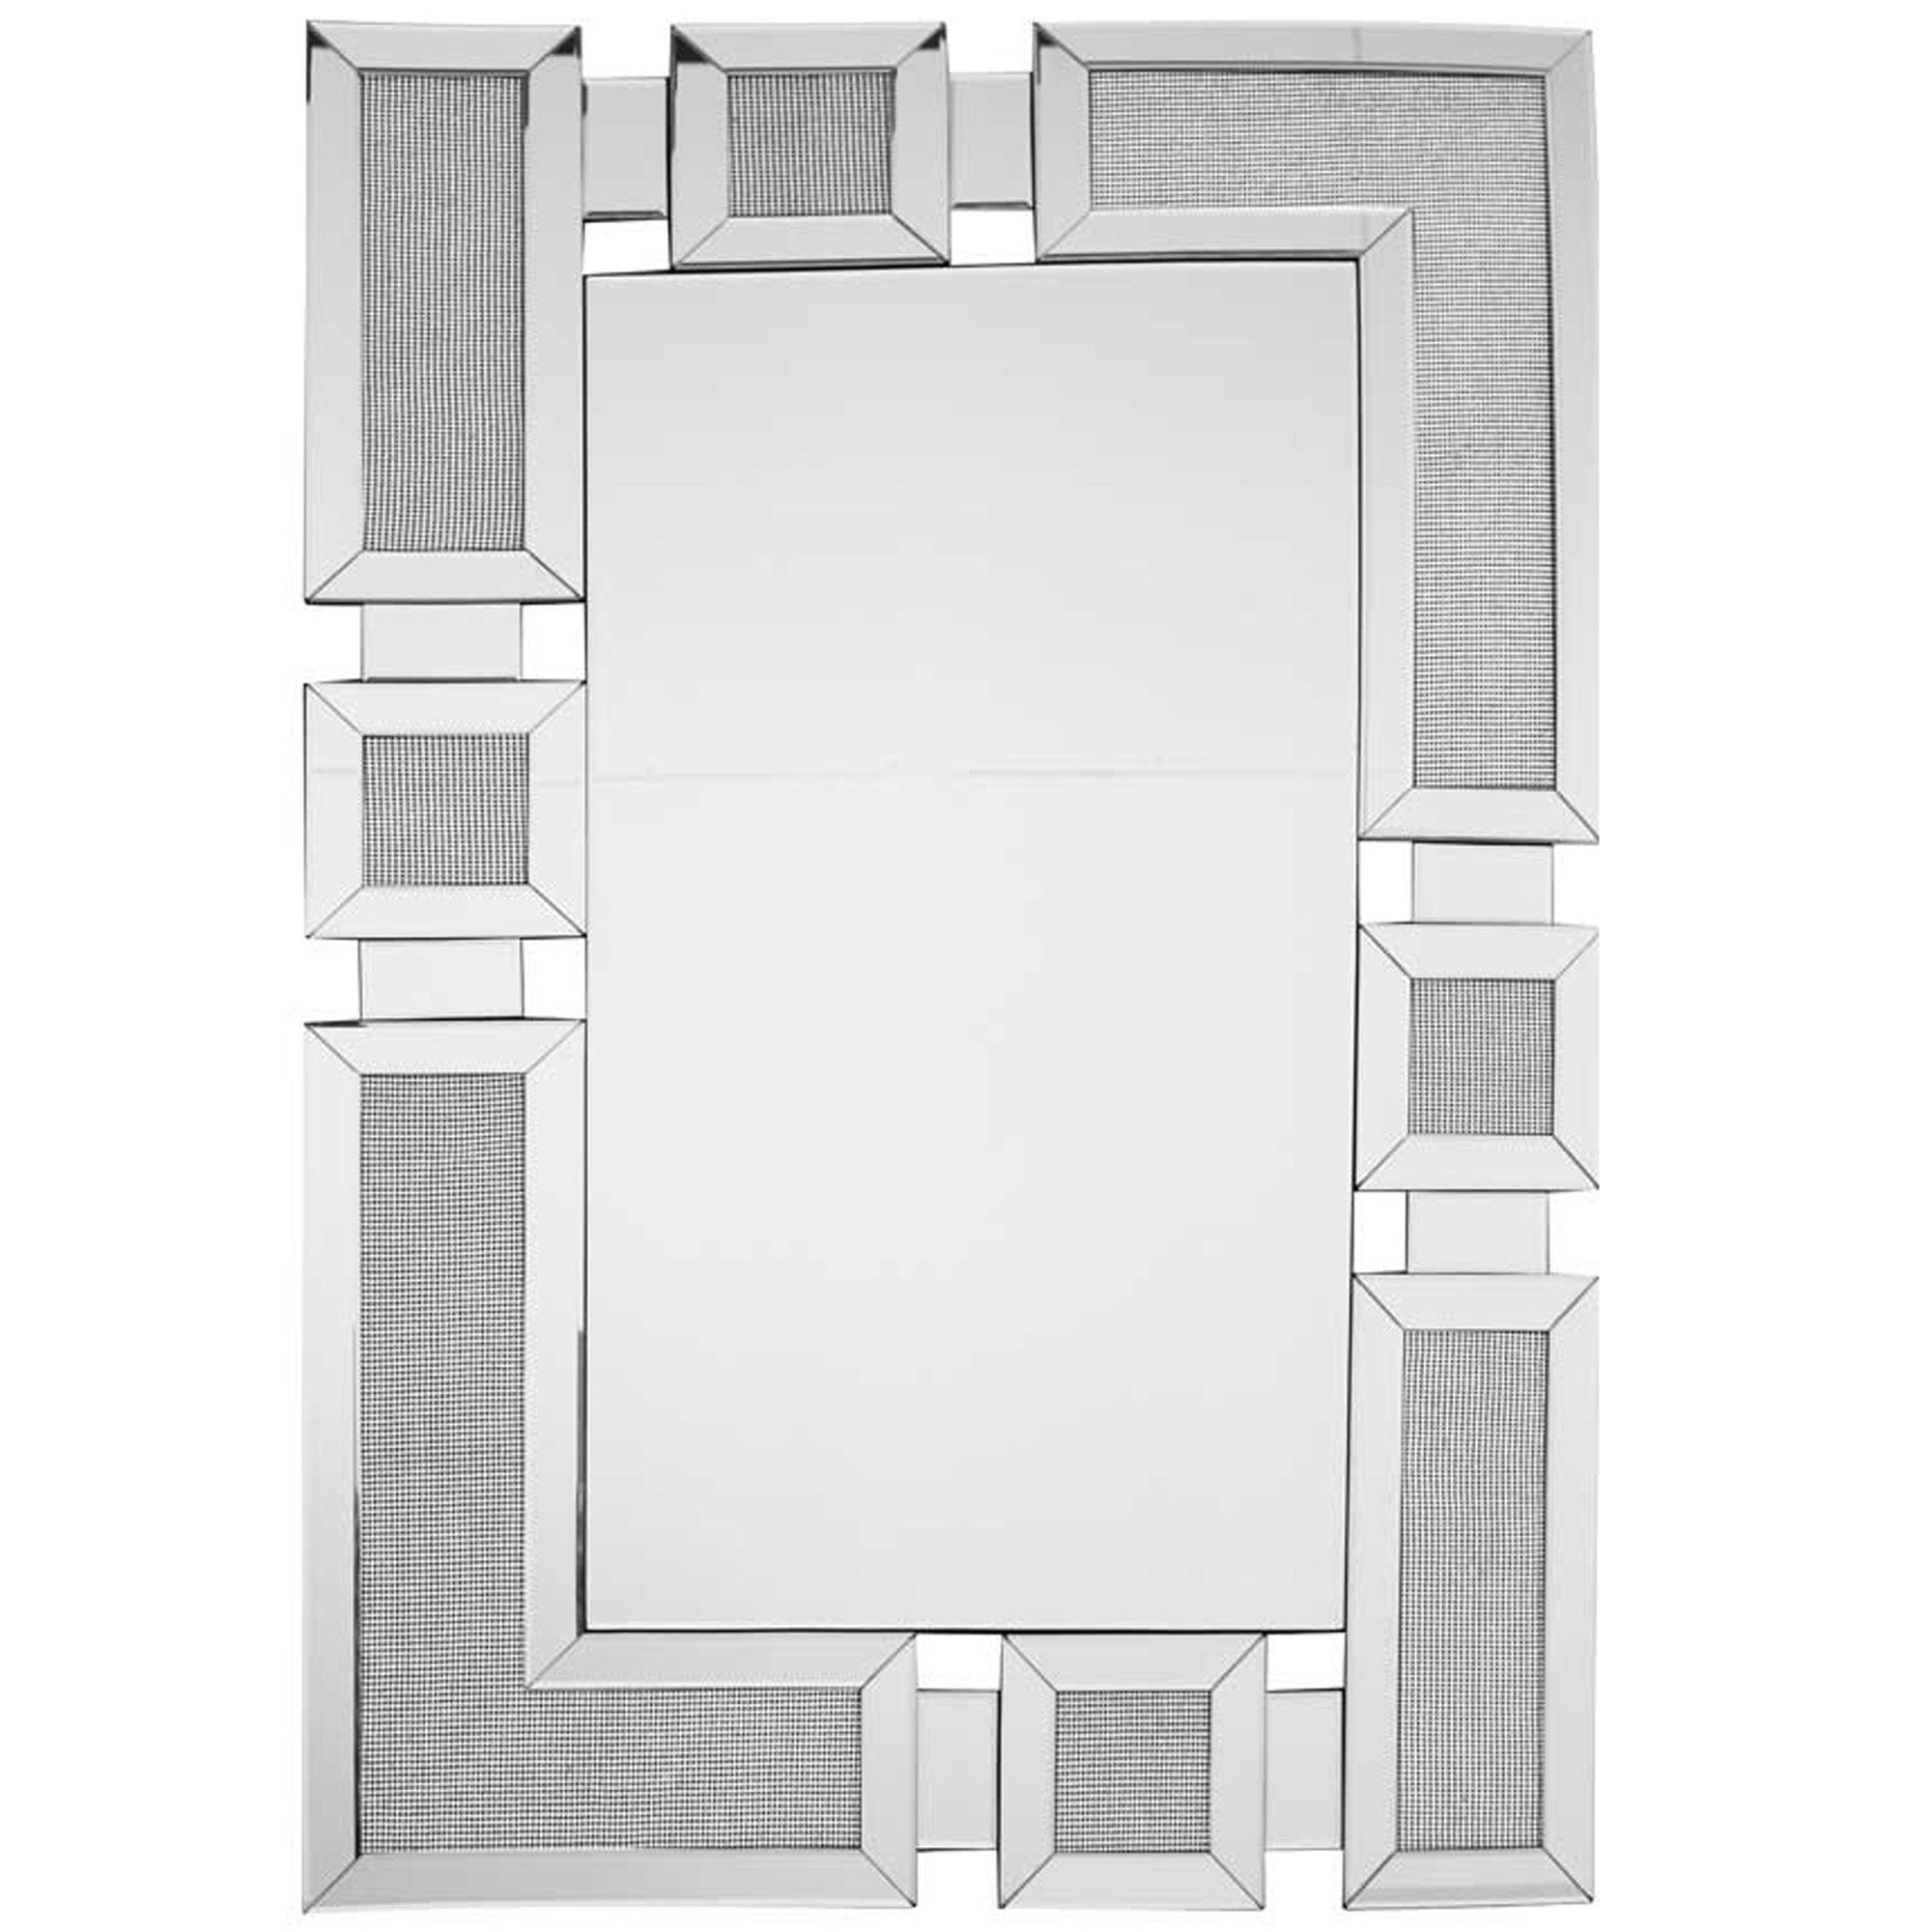 Glamour Decorative Silver Wall Mirror | Decorative Wall Mirrors Throughout Silver Decorative Wall Mirrors (View 15 of 15)